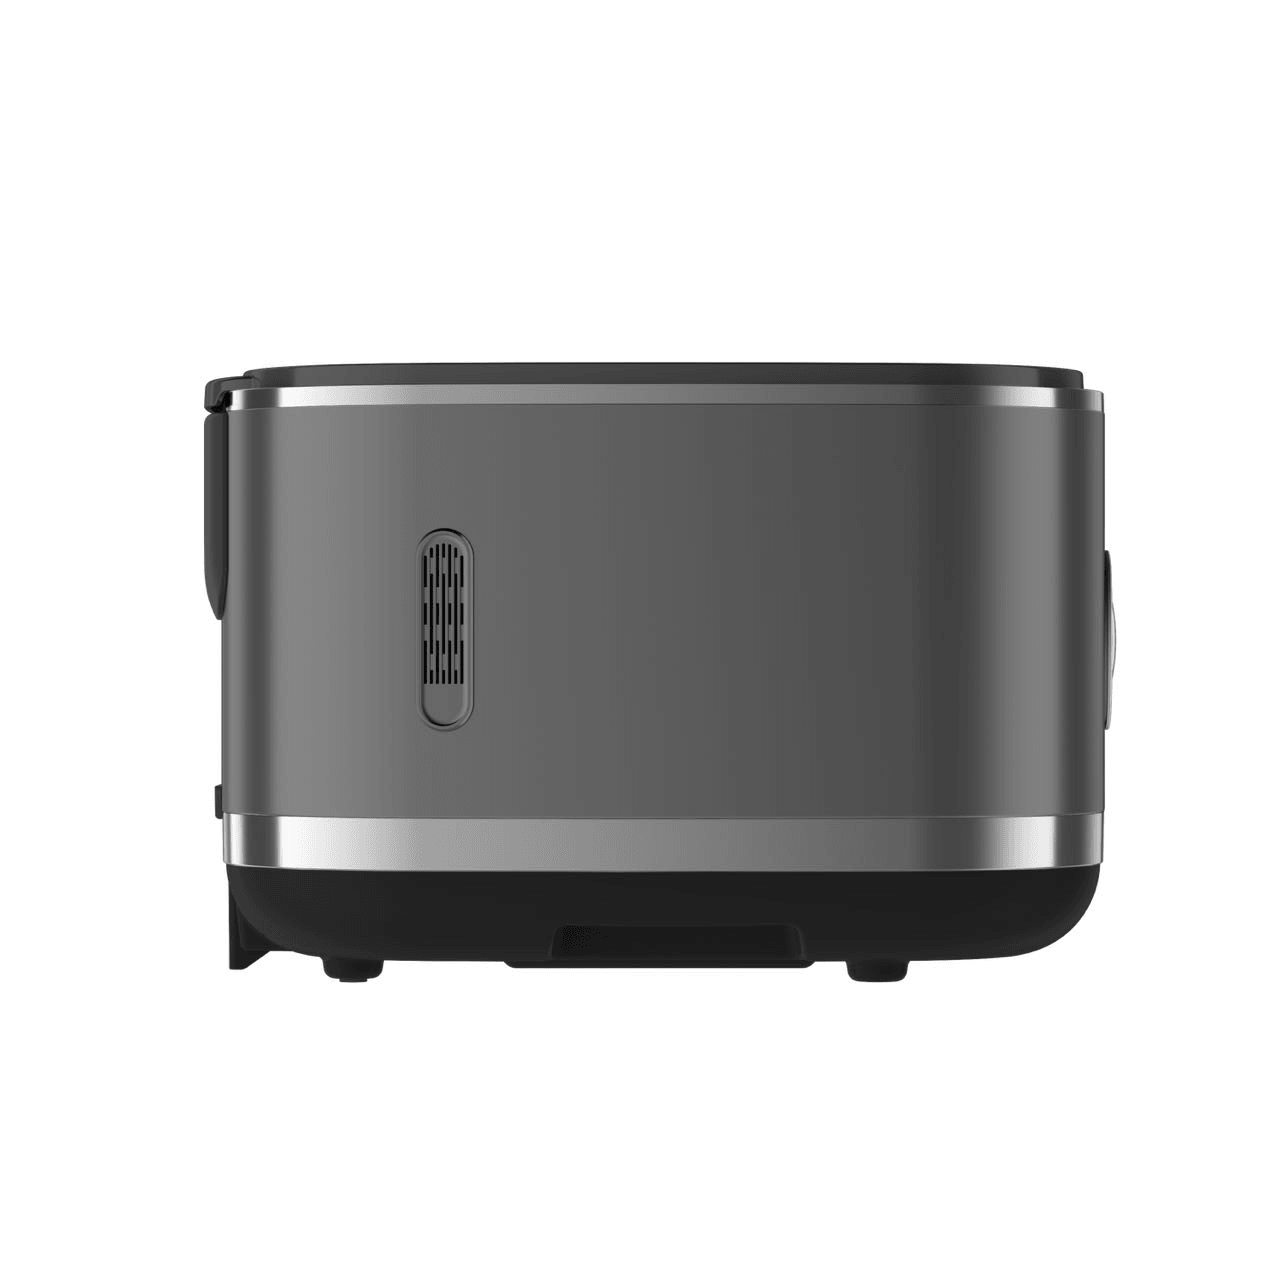 Joyoung's 2nd generation 0-coating IH heating rice cooker C8M-RC5G, back